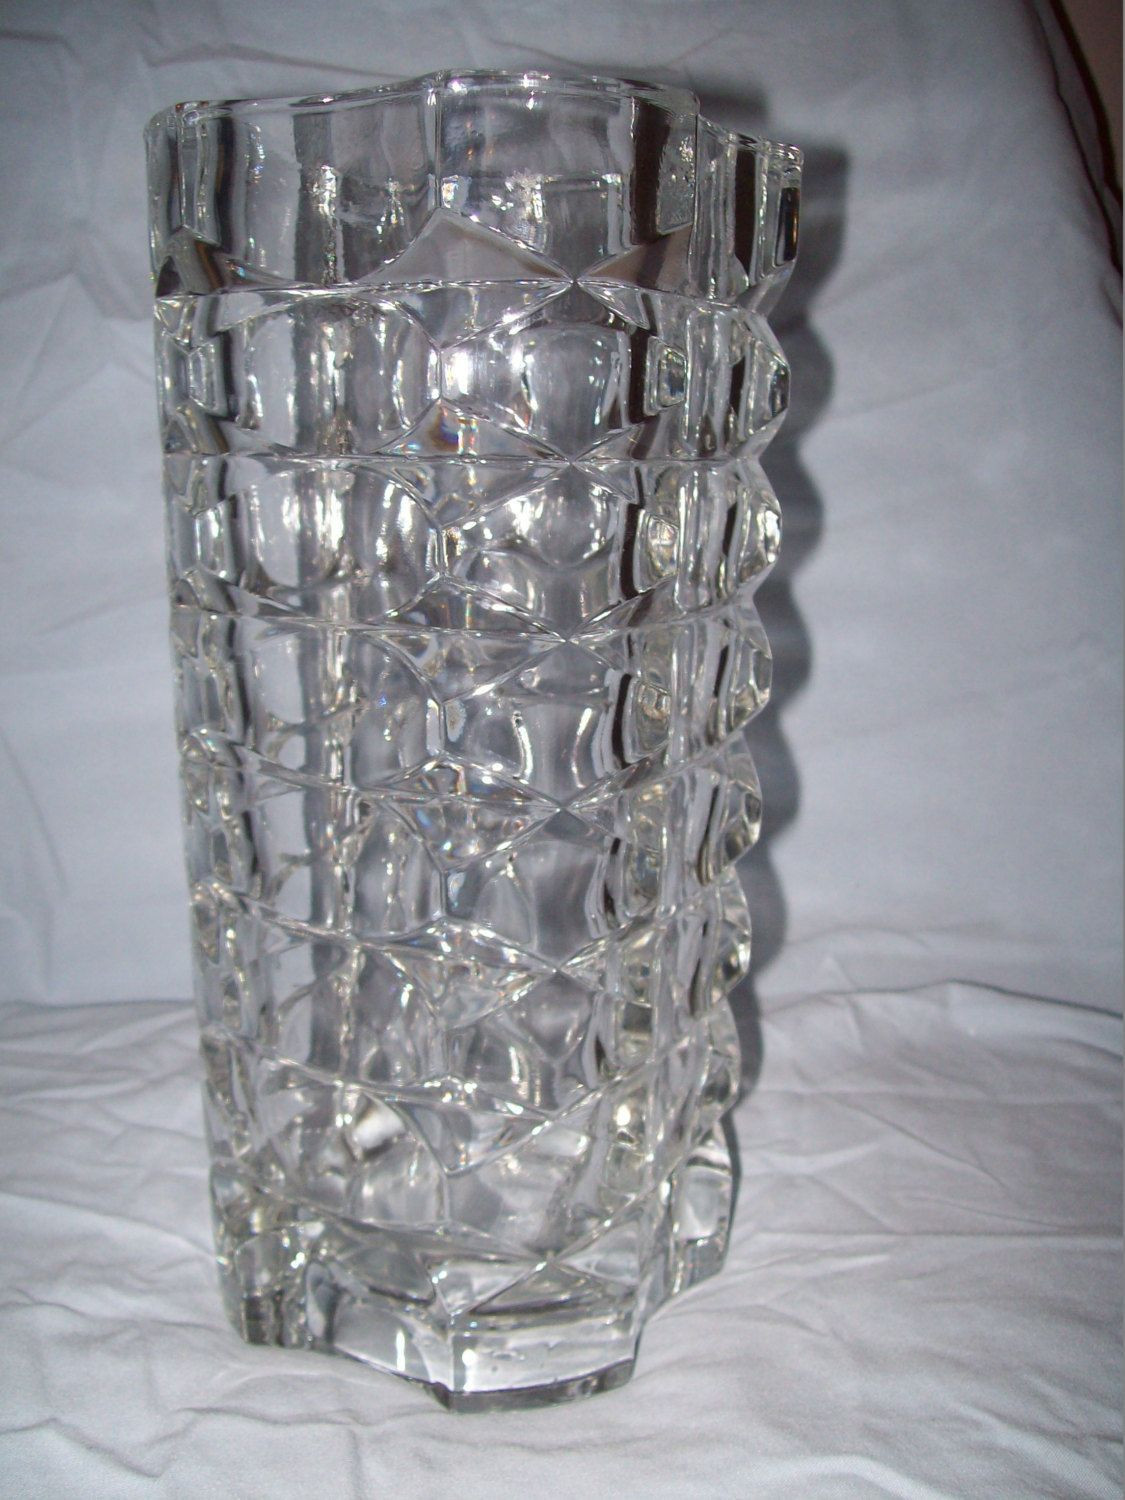 28 Great 6 Inch Square Glass Vase 2024 free download 6 inch square glass vase of clear glass vases photos 30 elegant tall square glass vases vases for clear glass vases image clear glass very old large vase leaded glass very heavy 66 00